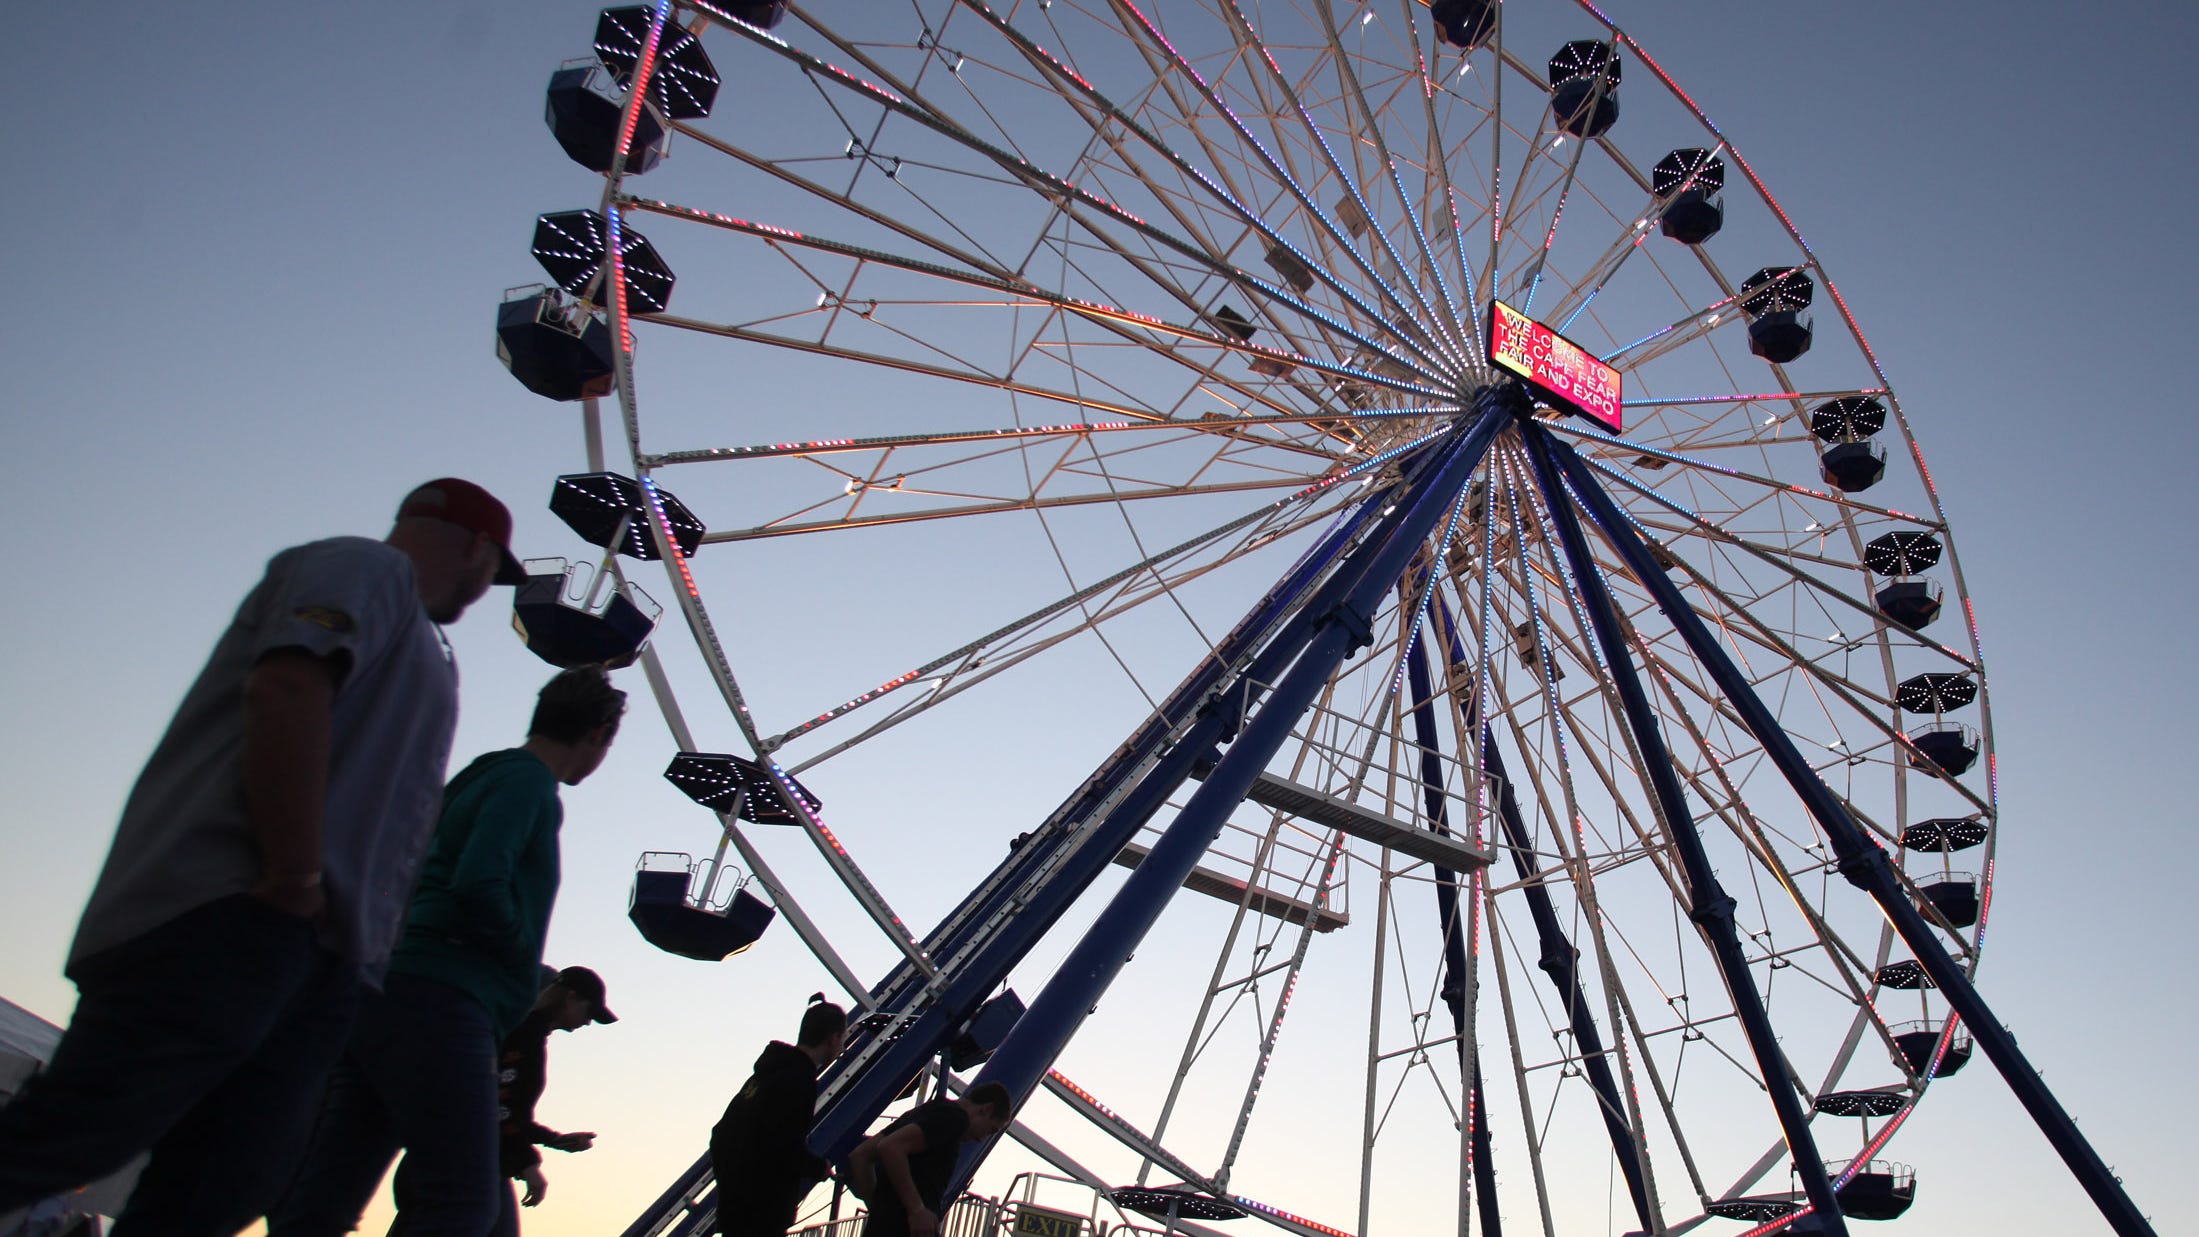 Cape Fear Fair and Expo confirms no 2022 event in Wilmington